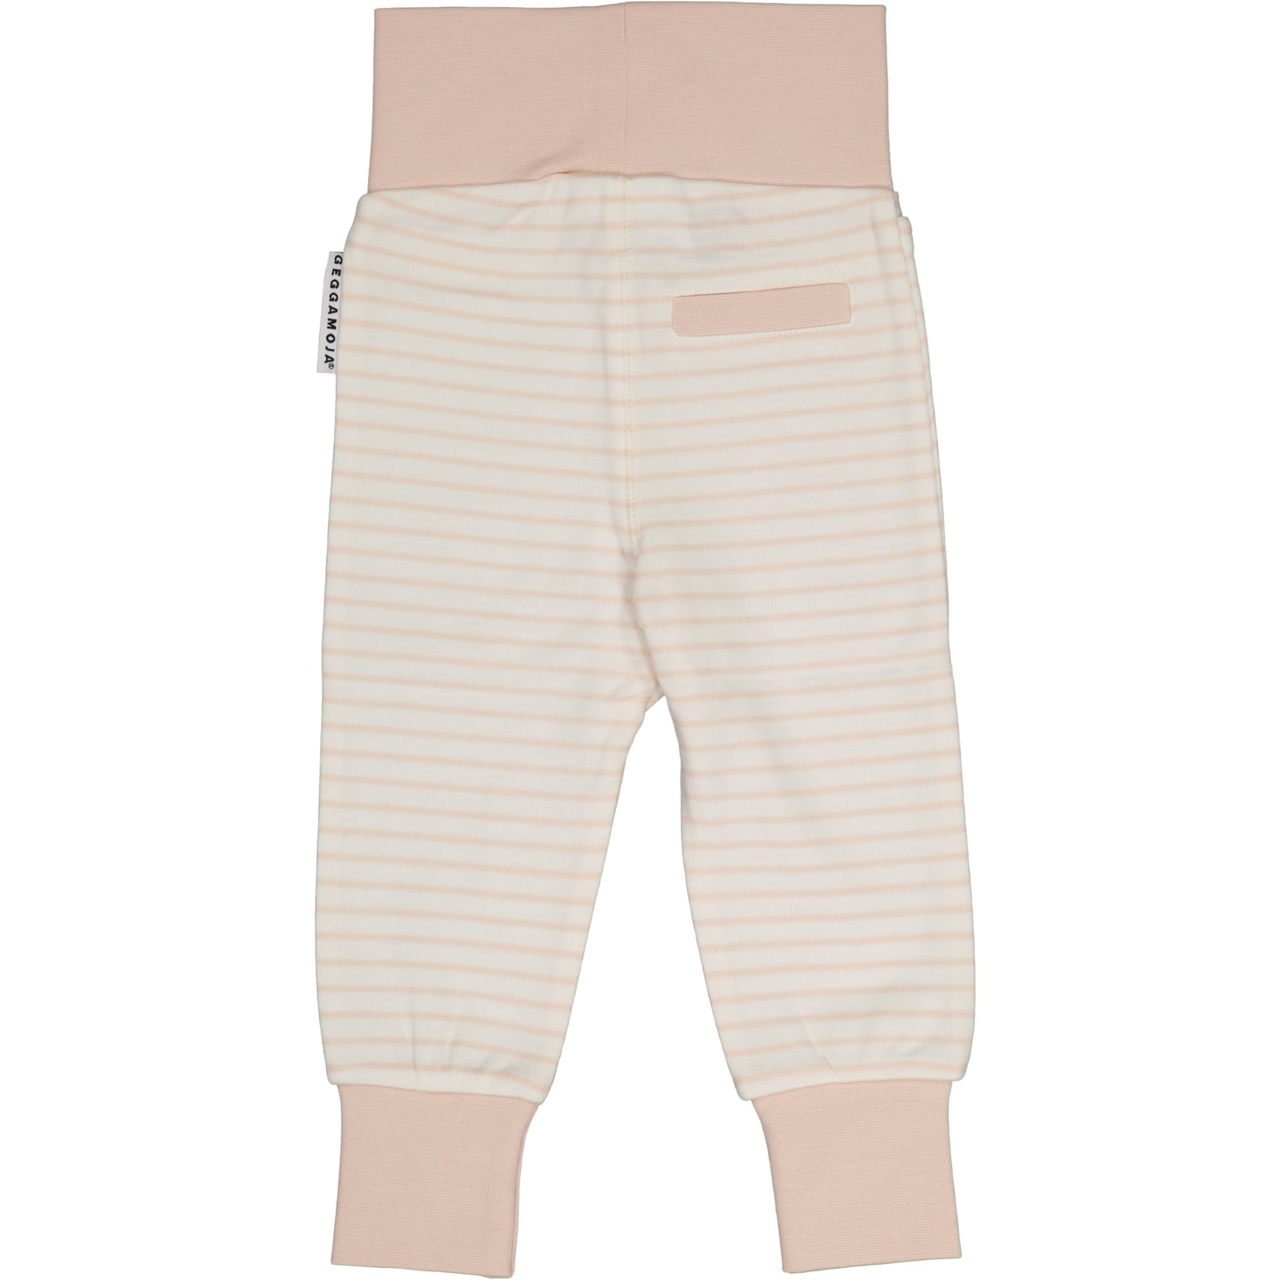 Baby trouser L.pink/offwhite 50/56